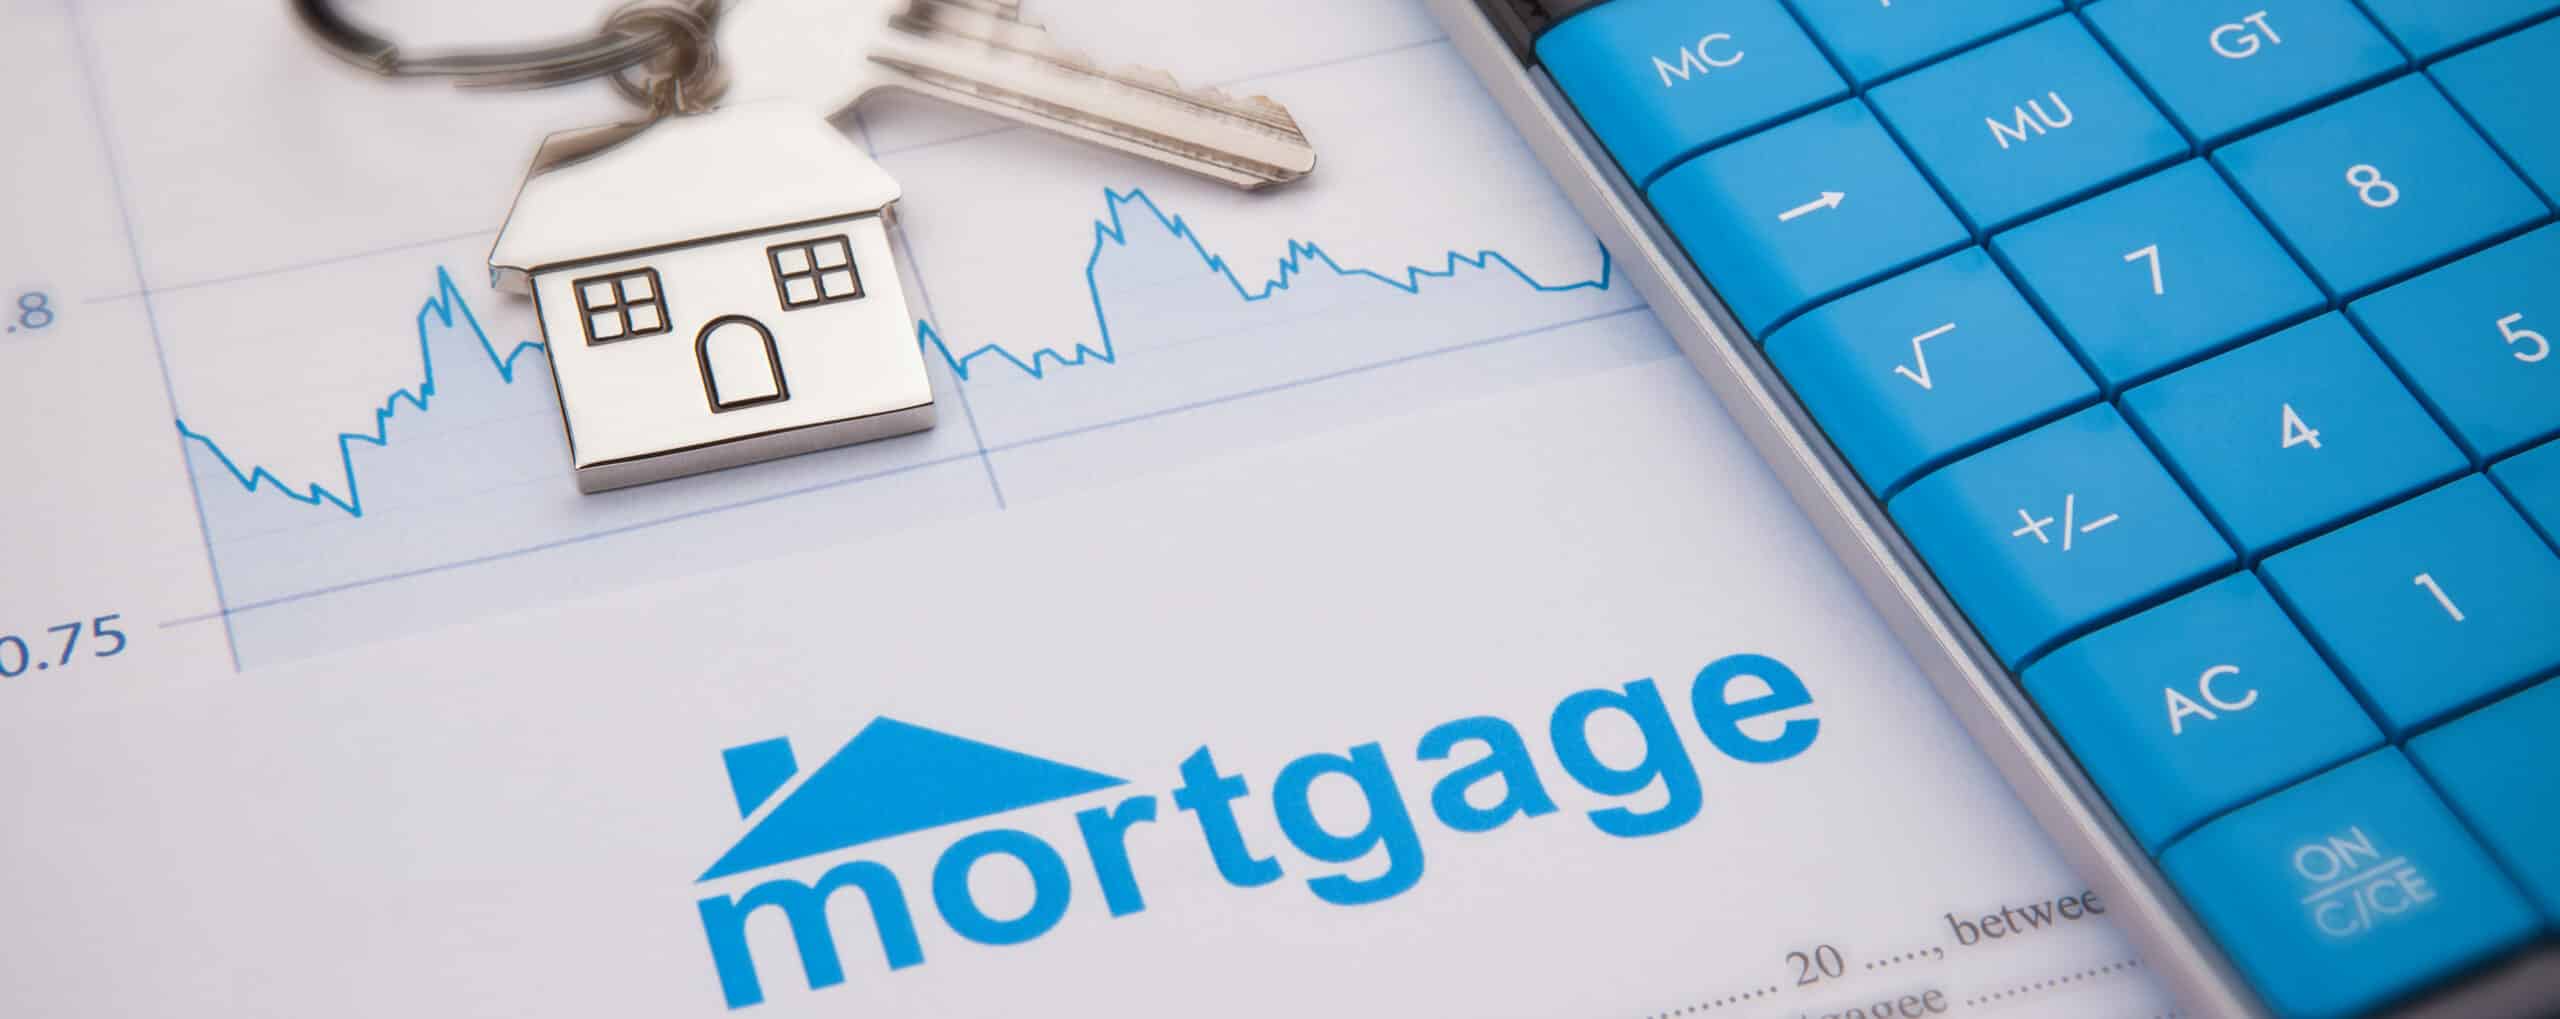 Mortgages: Rates, APR, Types, and what it means to your wallet